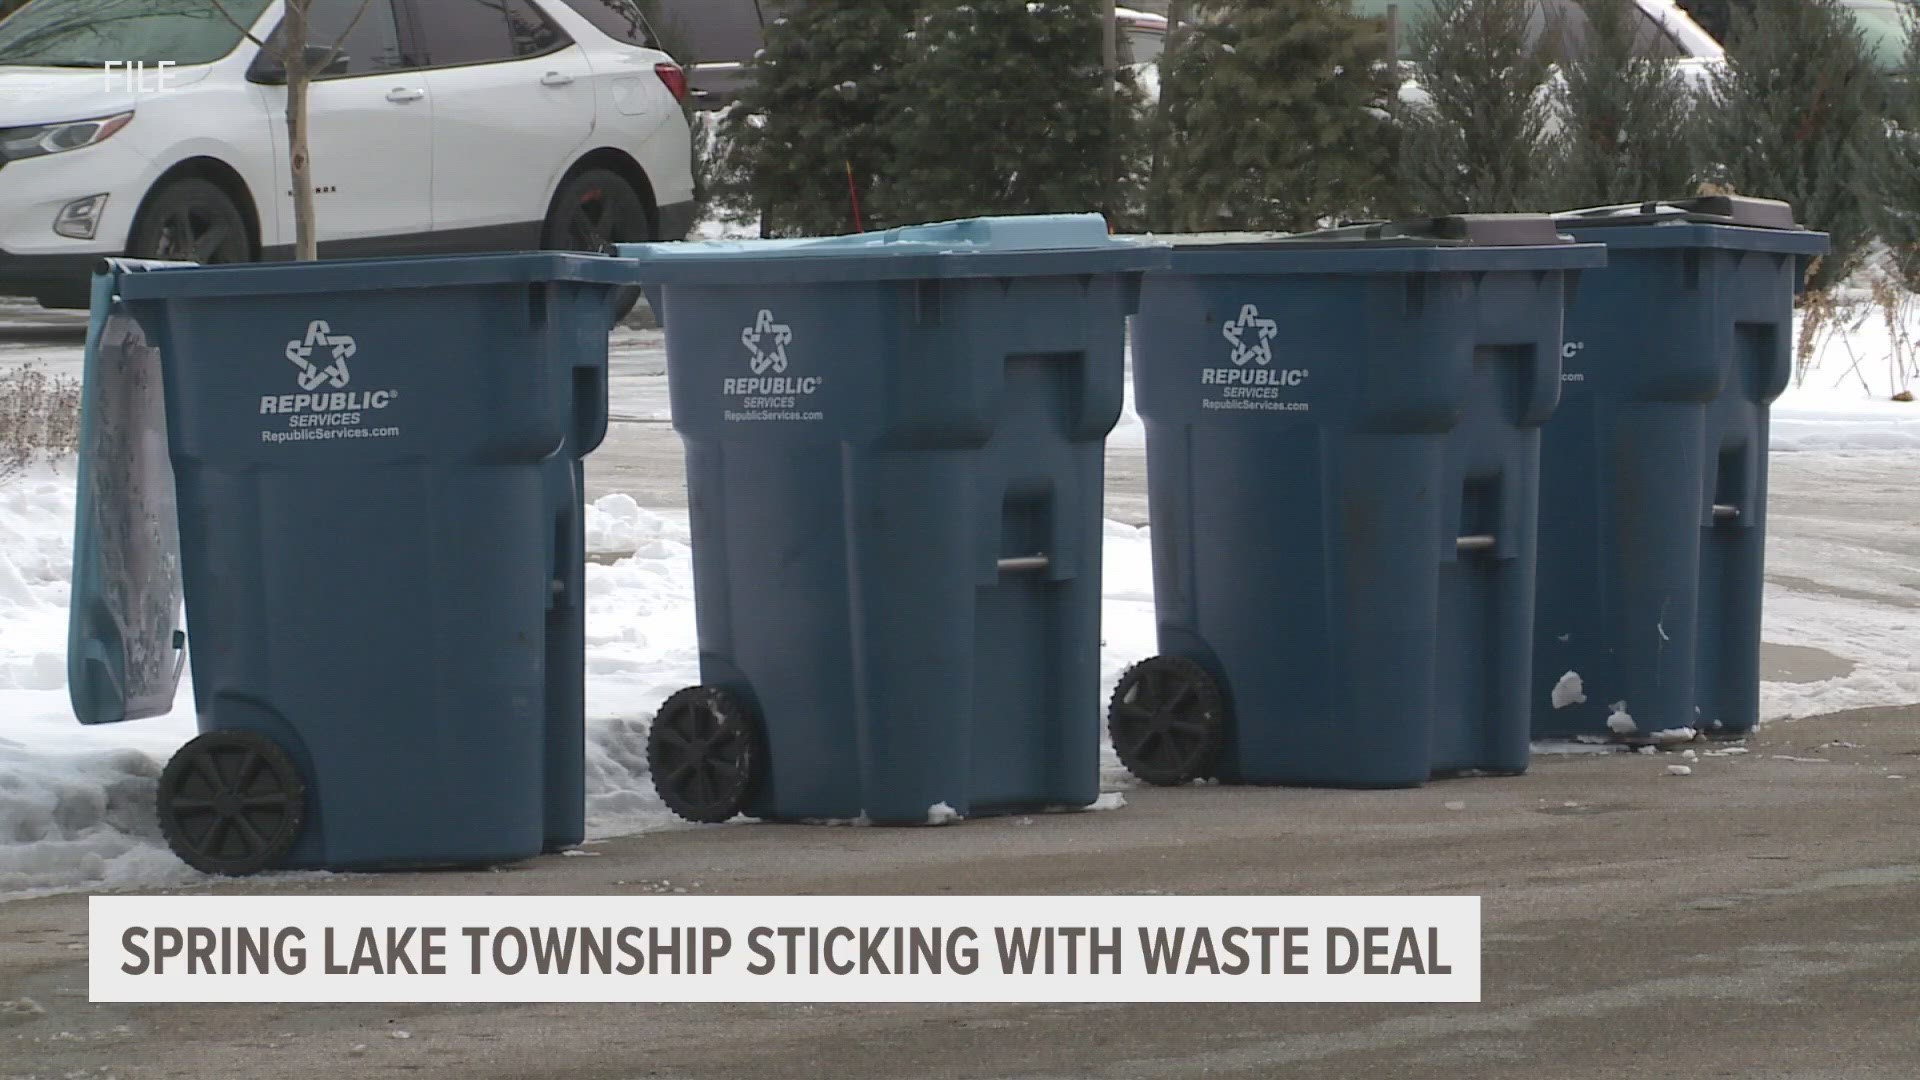 Spring Lake Twp. sticking with waste deal